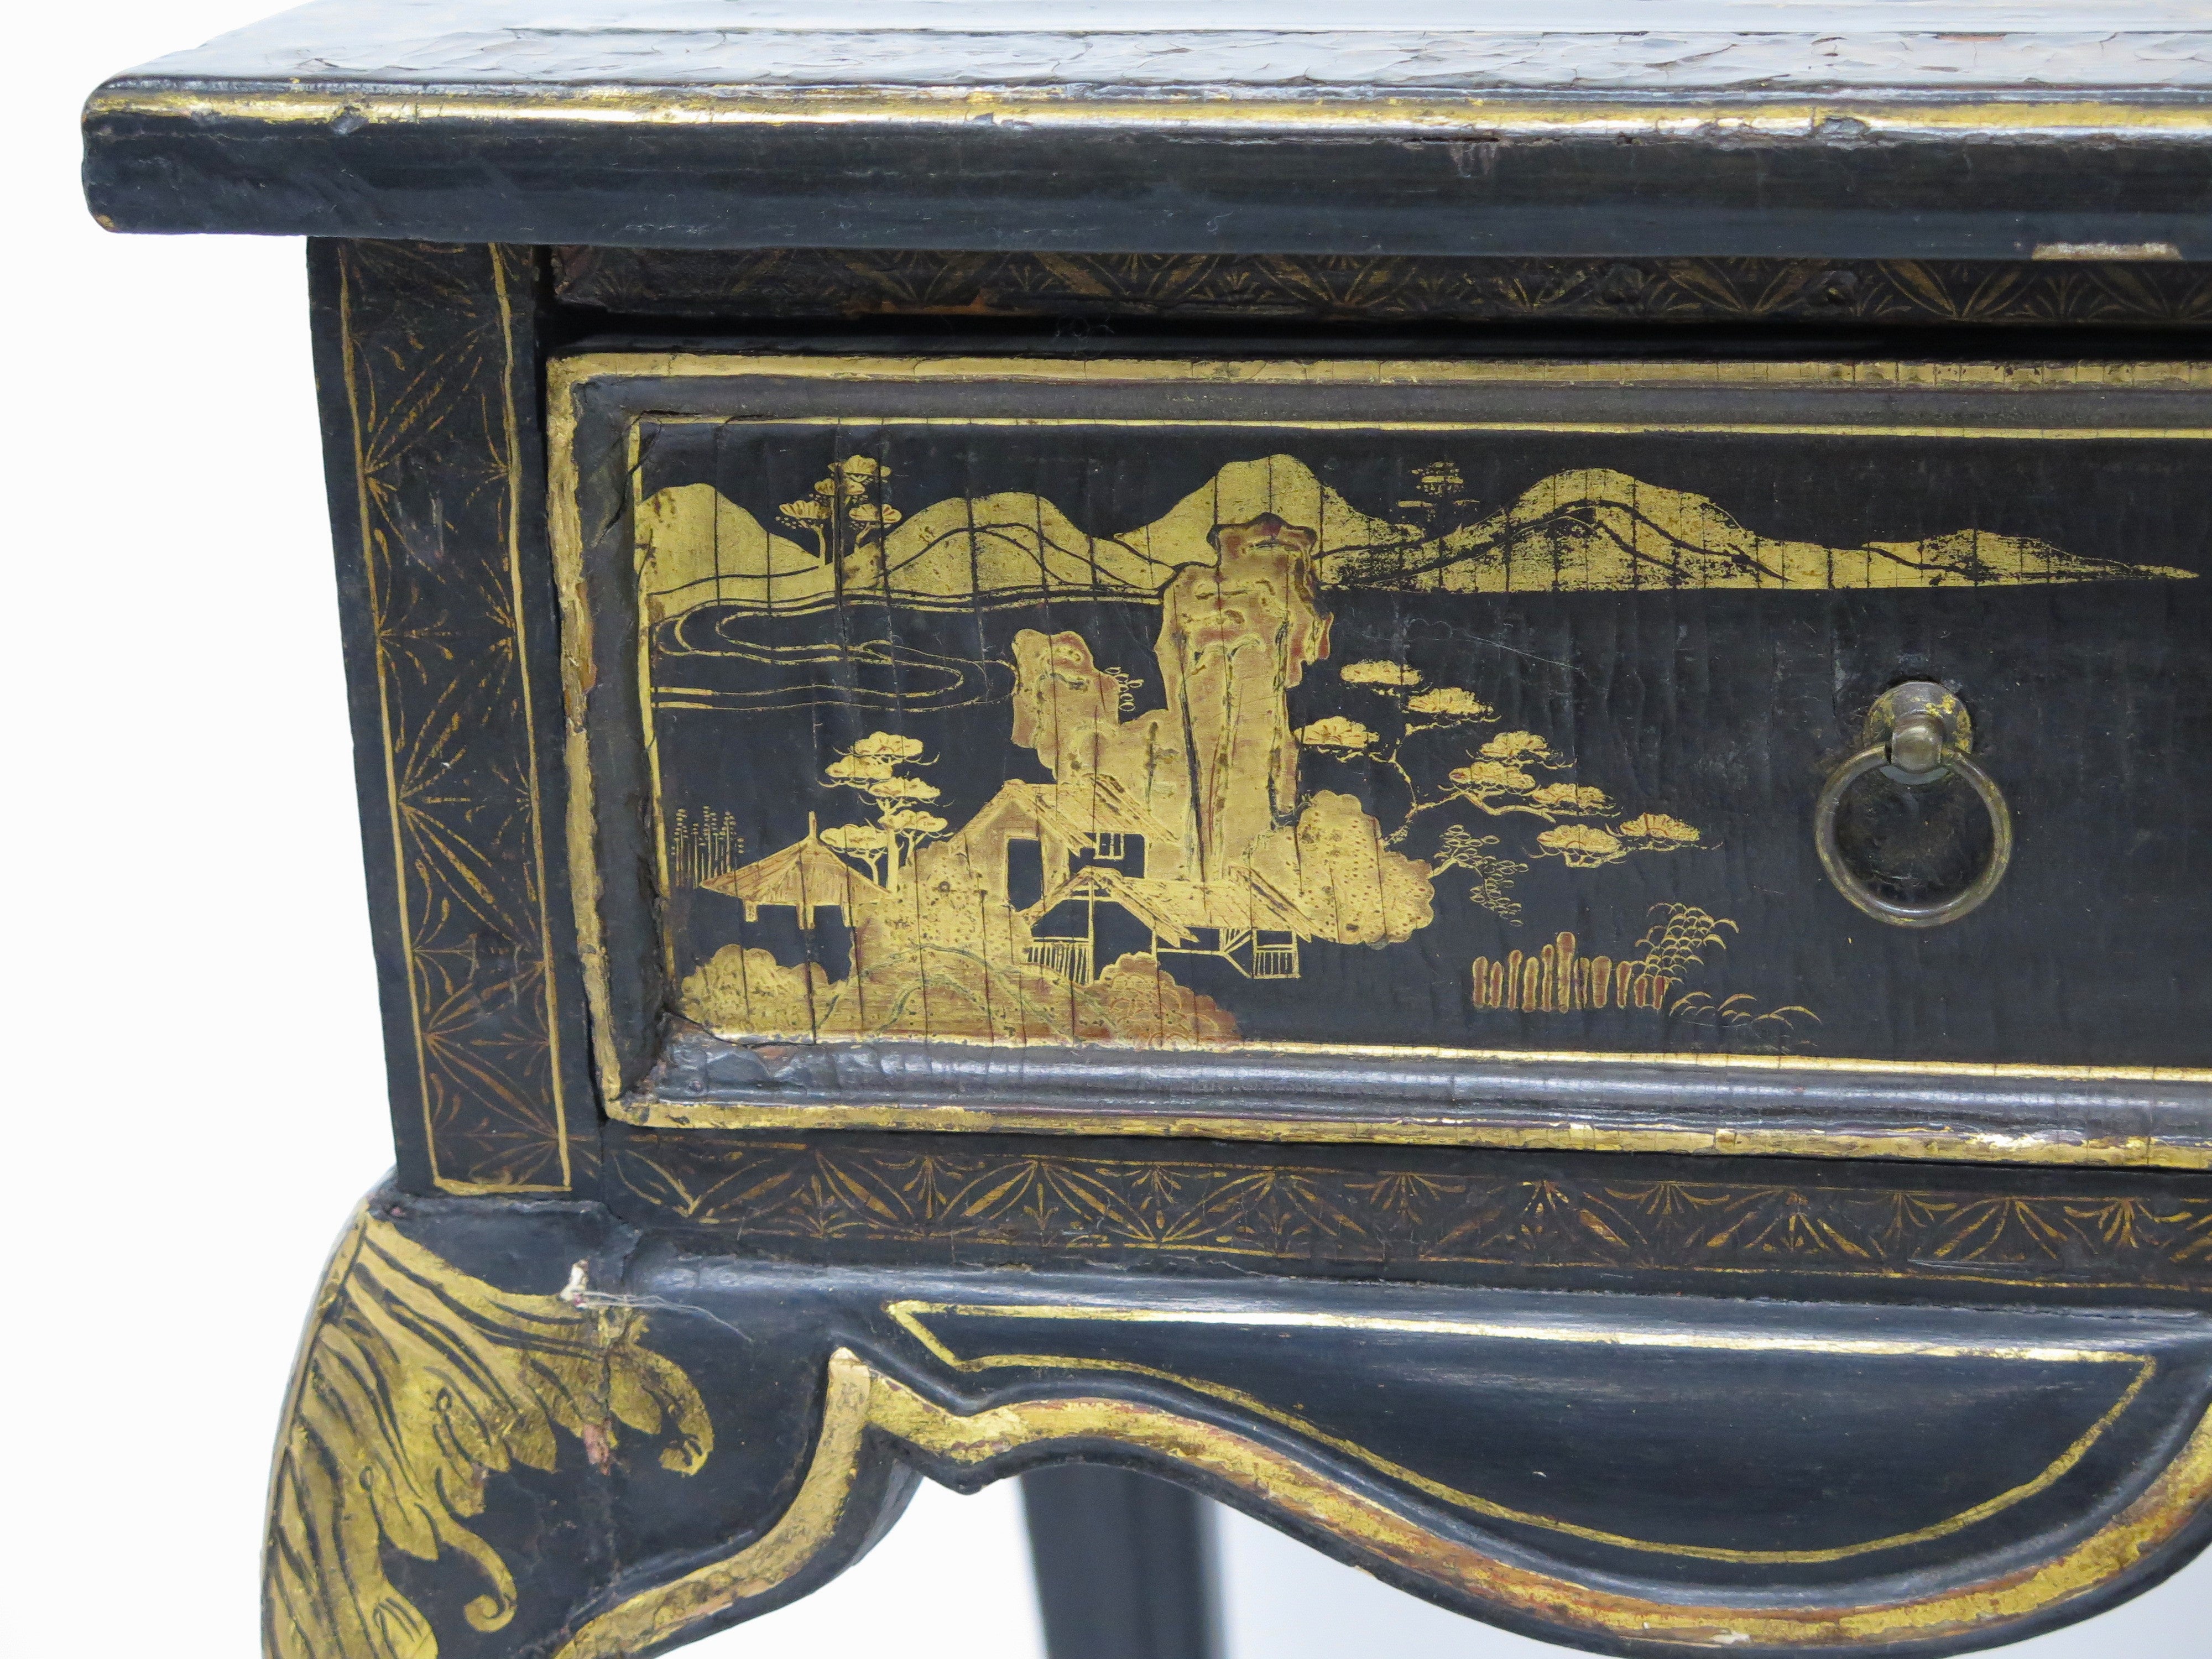 Early 19th Century Chinese Export Lacquered One Drawer Chinoiserie Sade Table